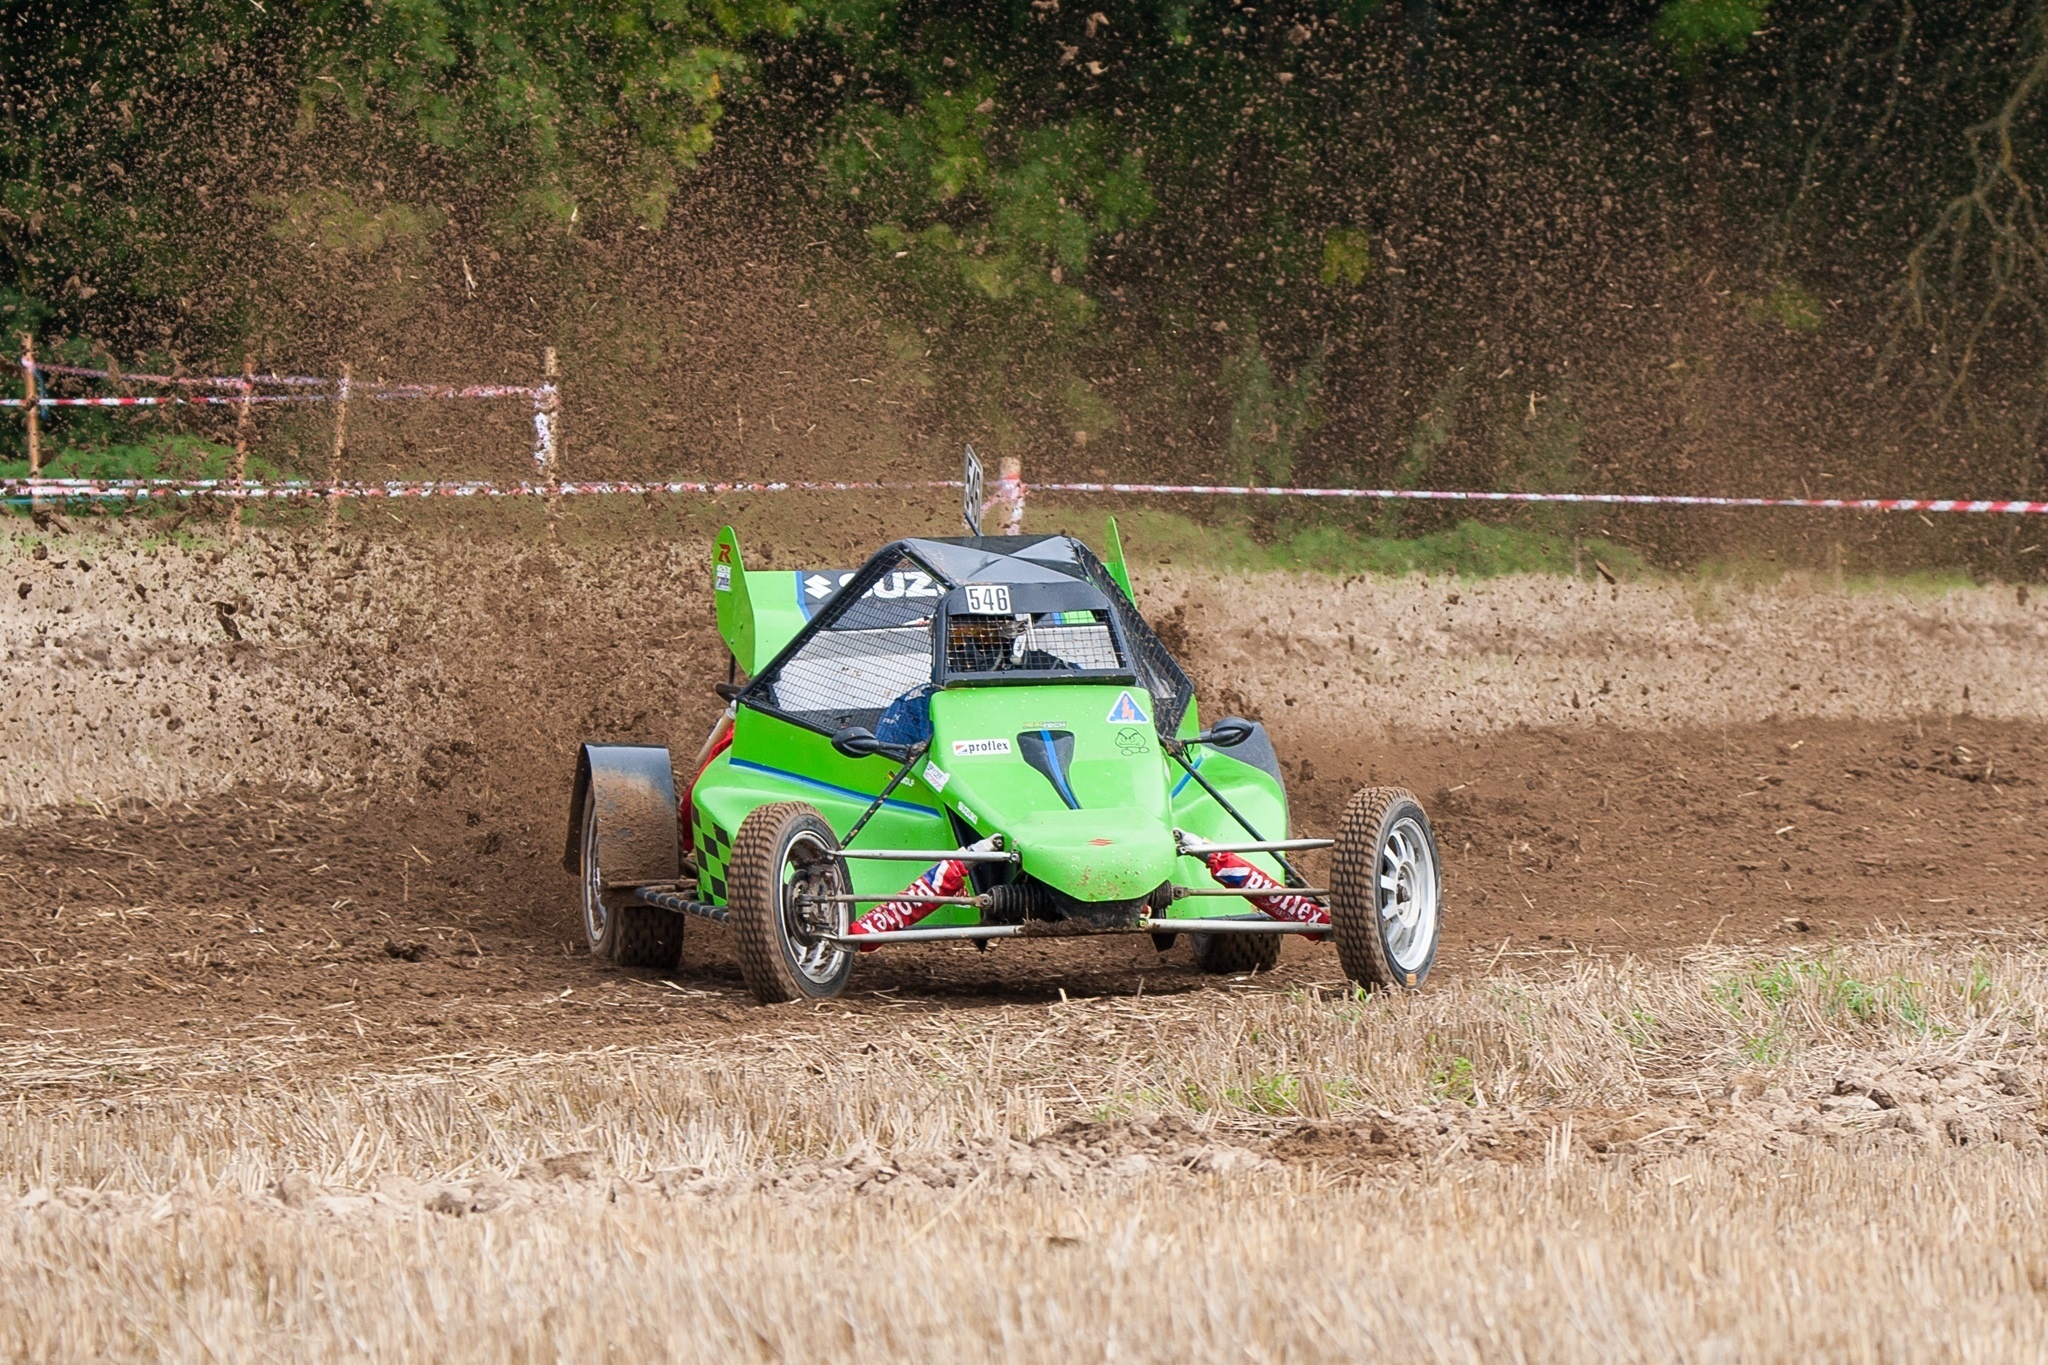 Autocross: Oversteered buggy, Drifting, Off-road racing, Rallying, Extreme motorsport. 2050x1370 HD Wallpaper.